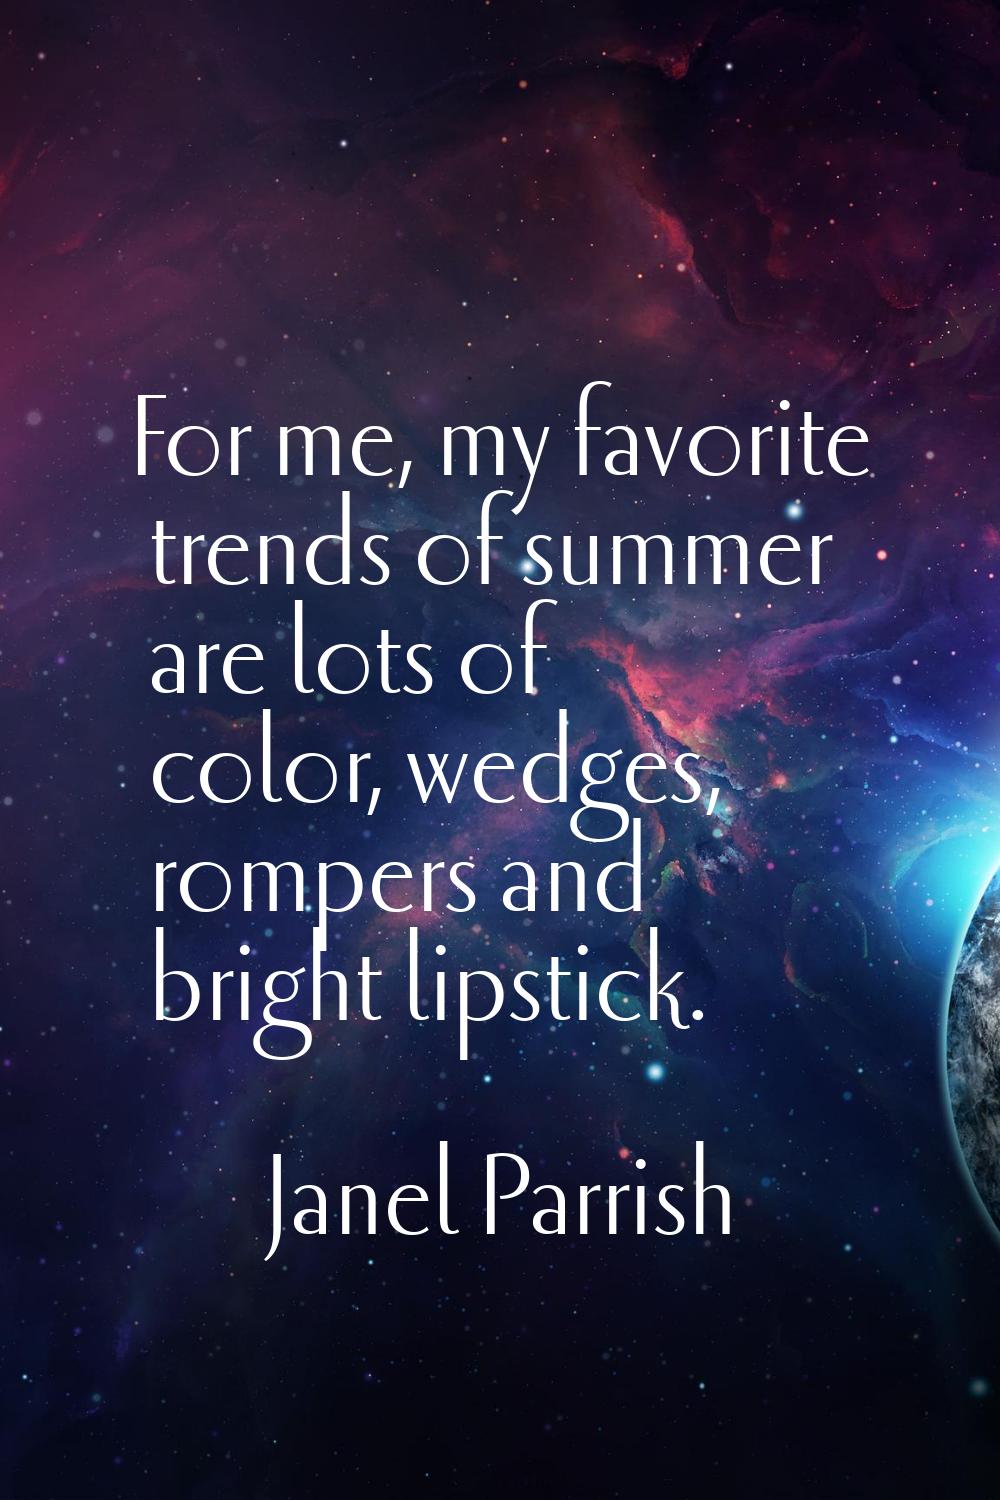 For me, my favorite trends of summer are lots of color, wedges, rompers and bright lipstick.